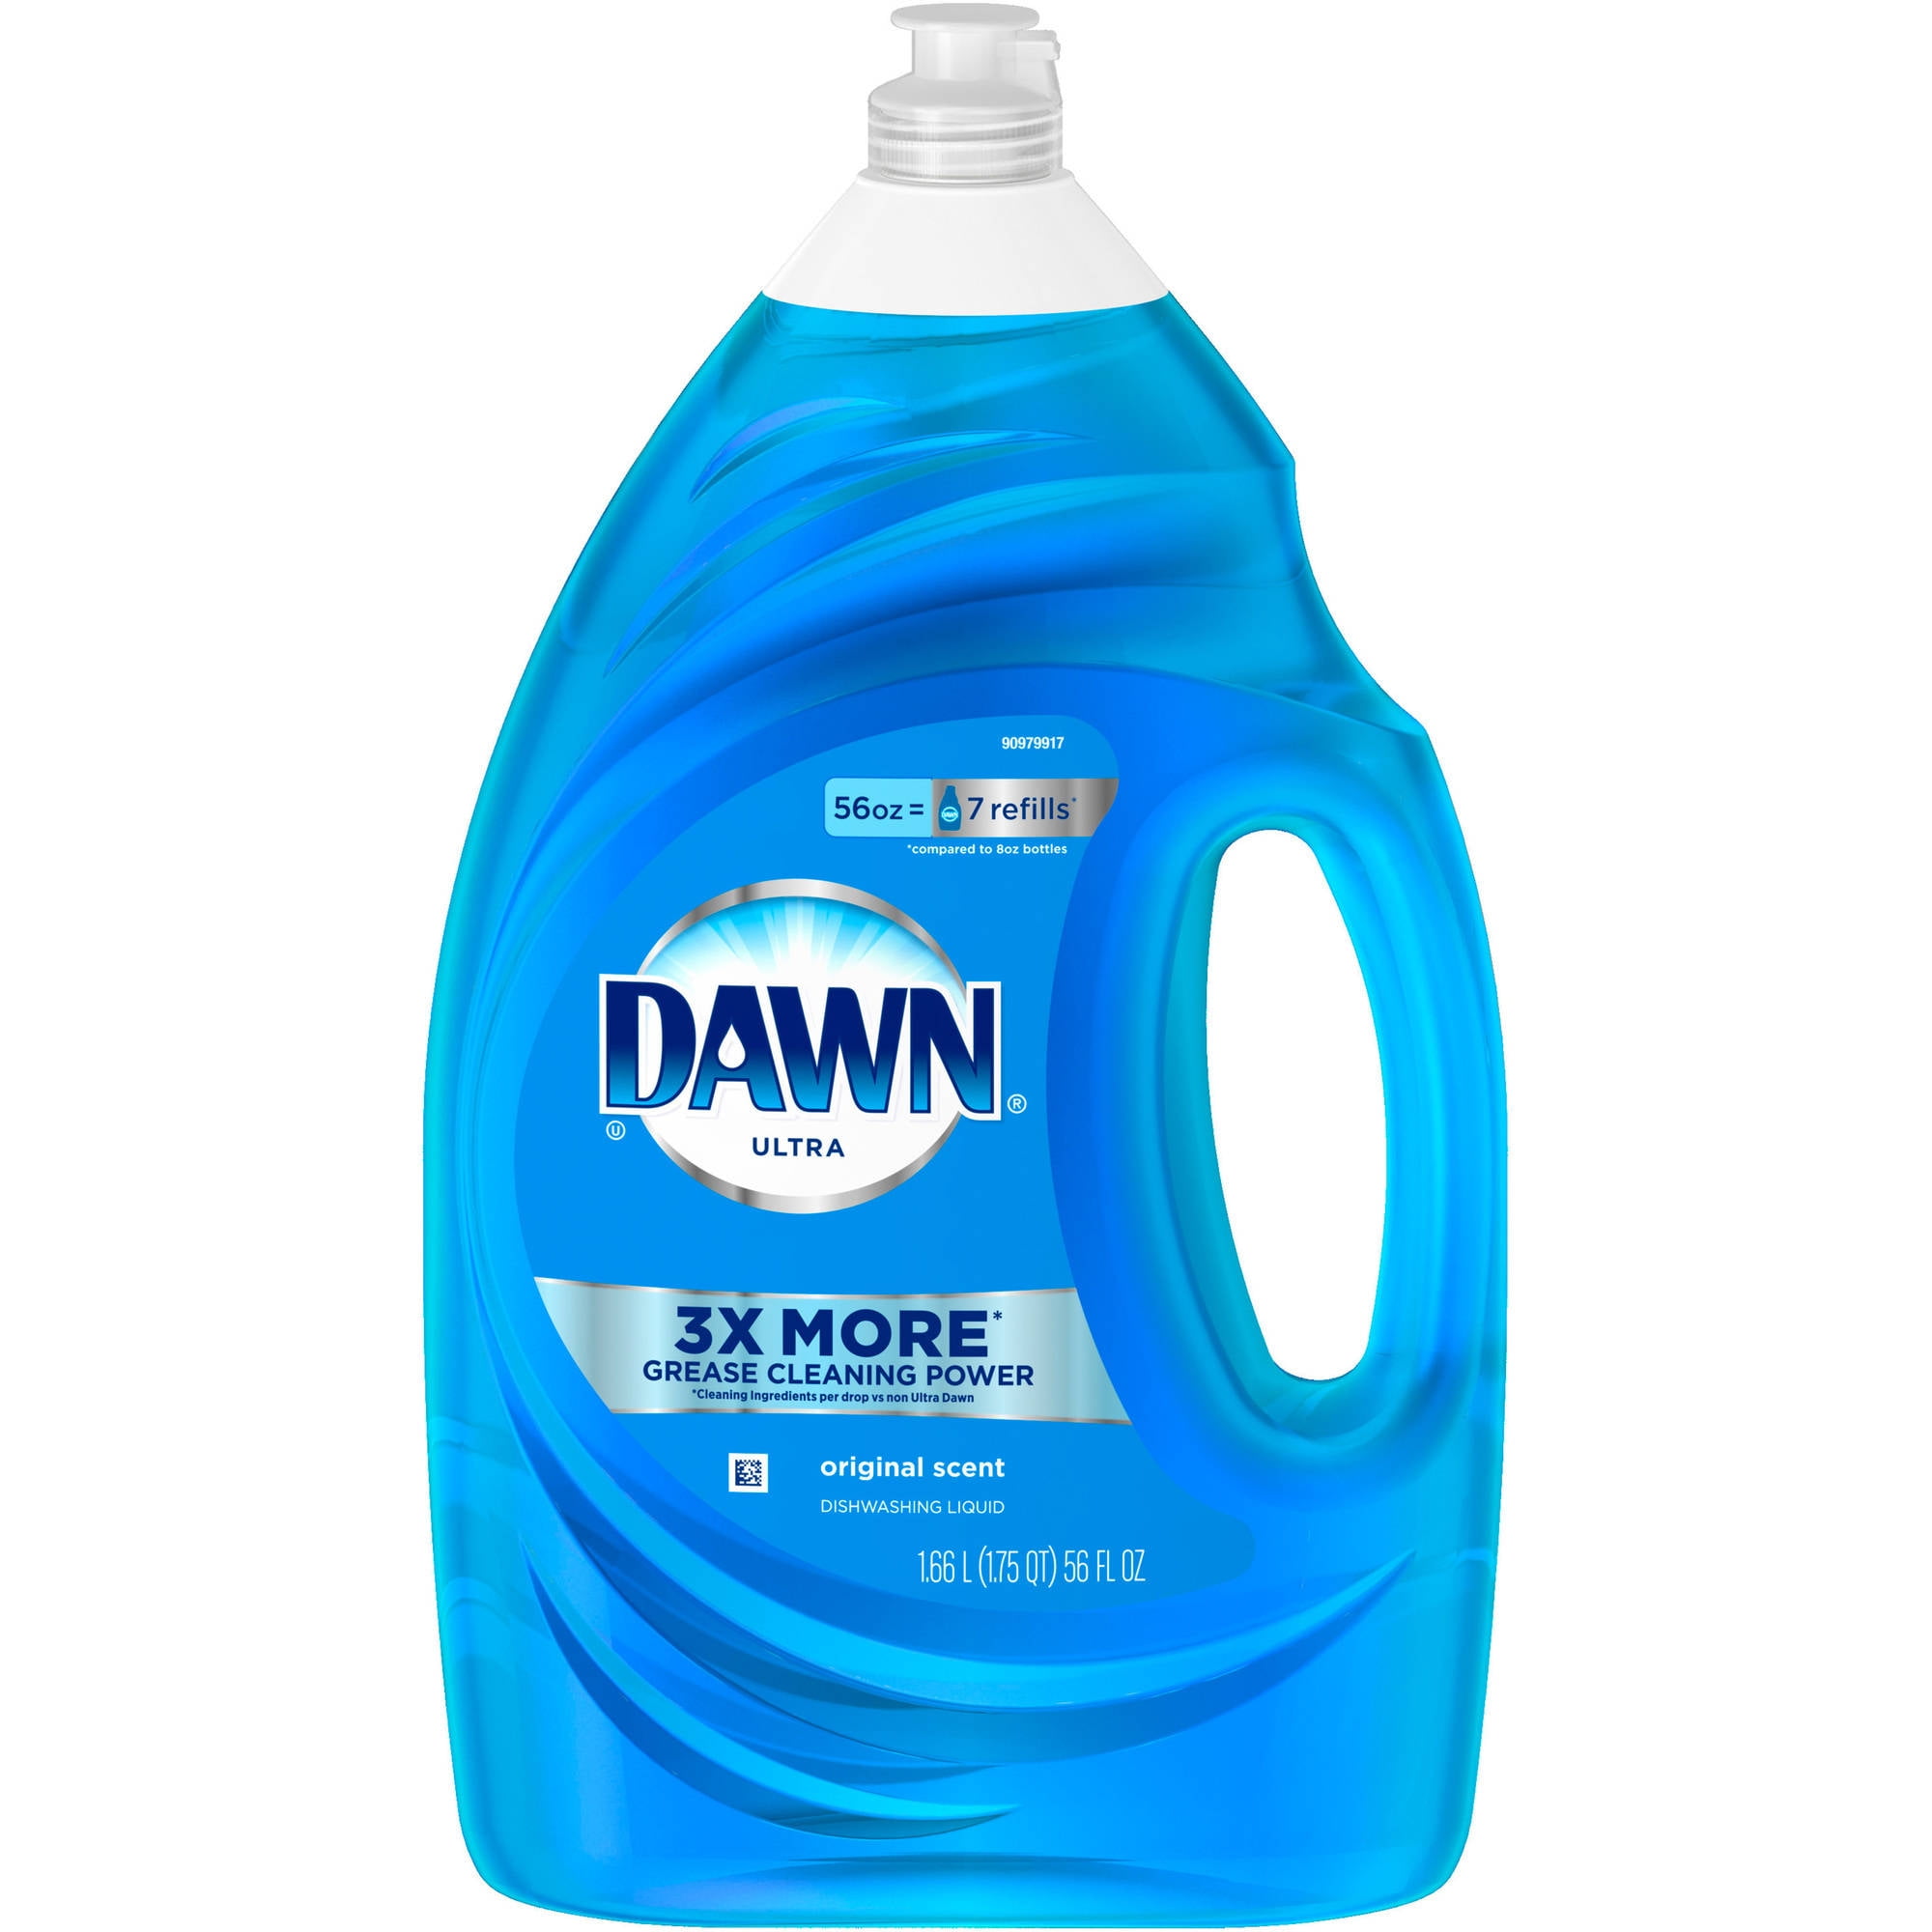 What are some of the ingredients found in Dawn dish soap?